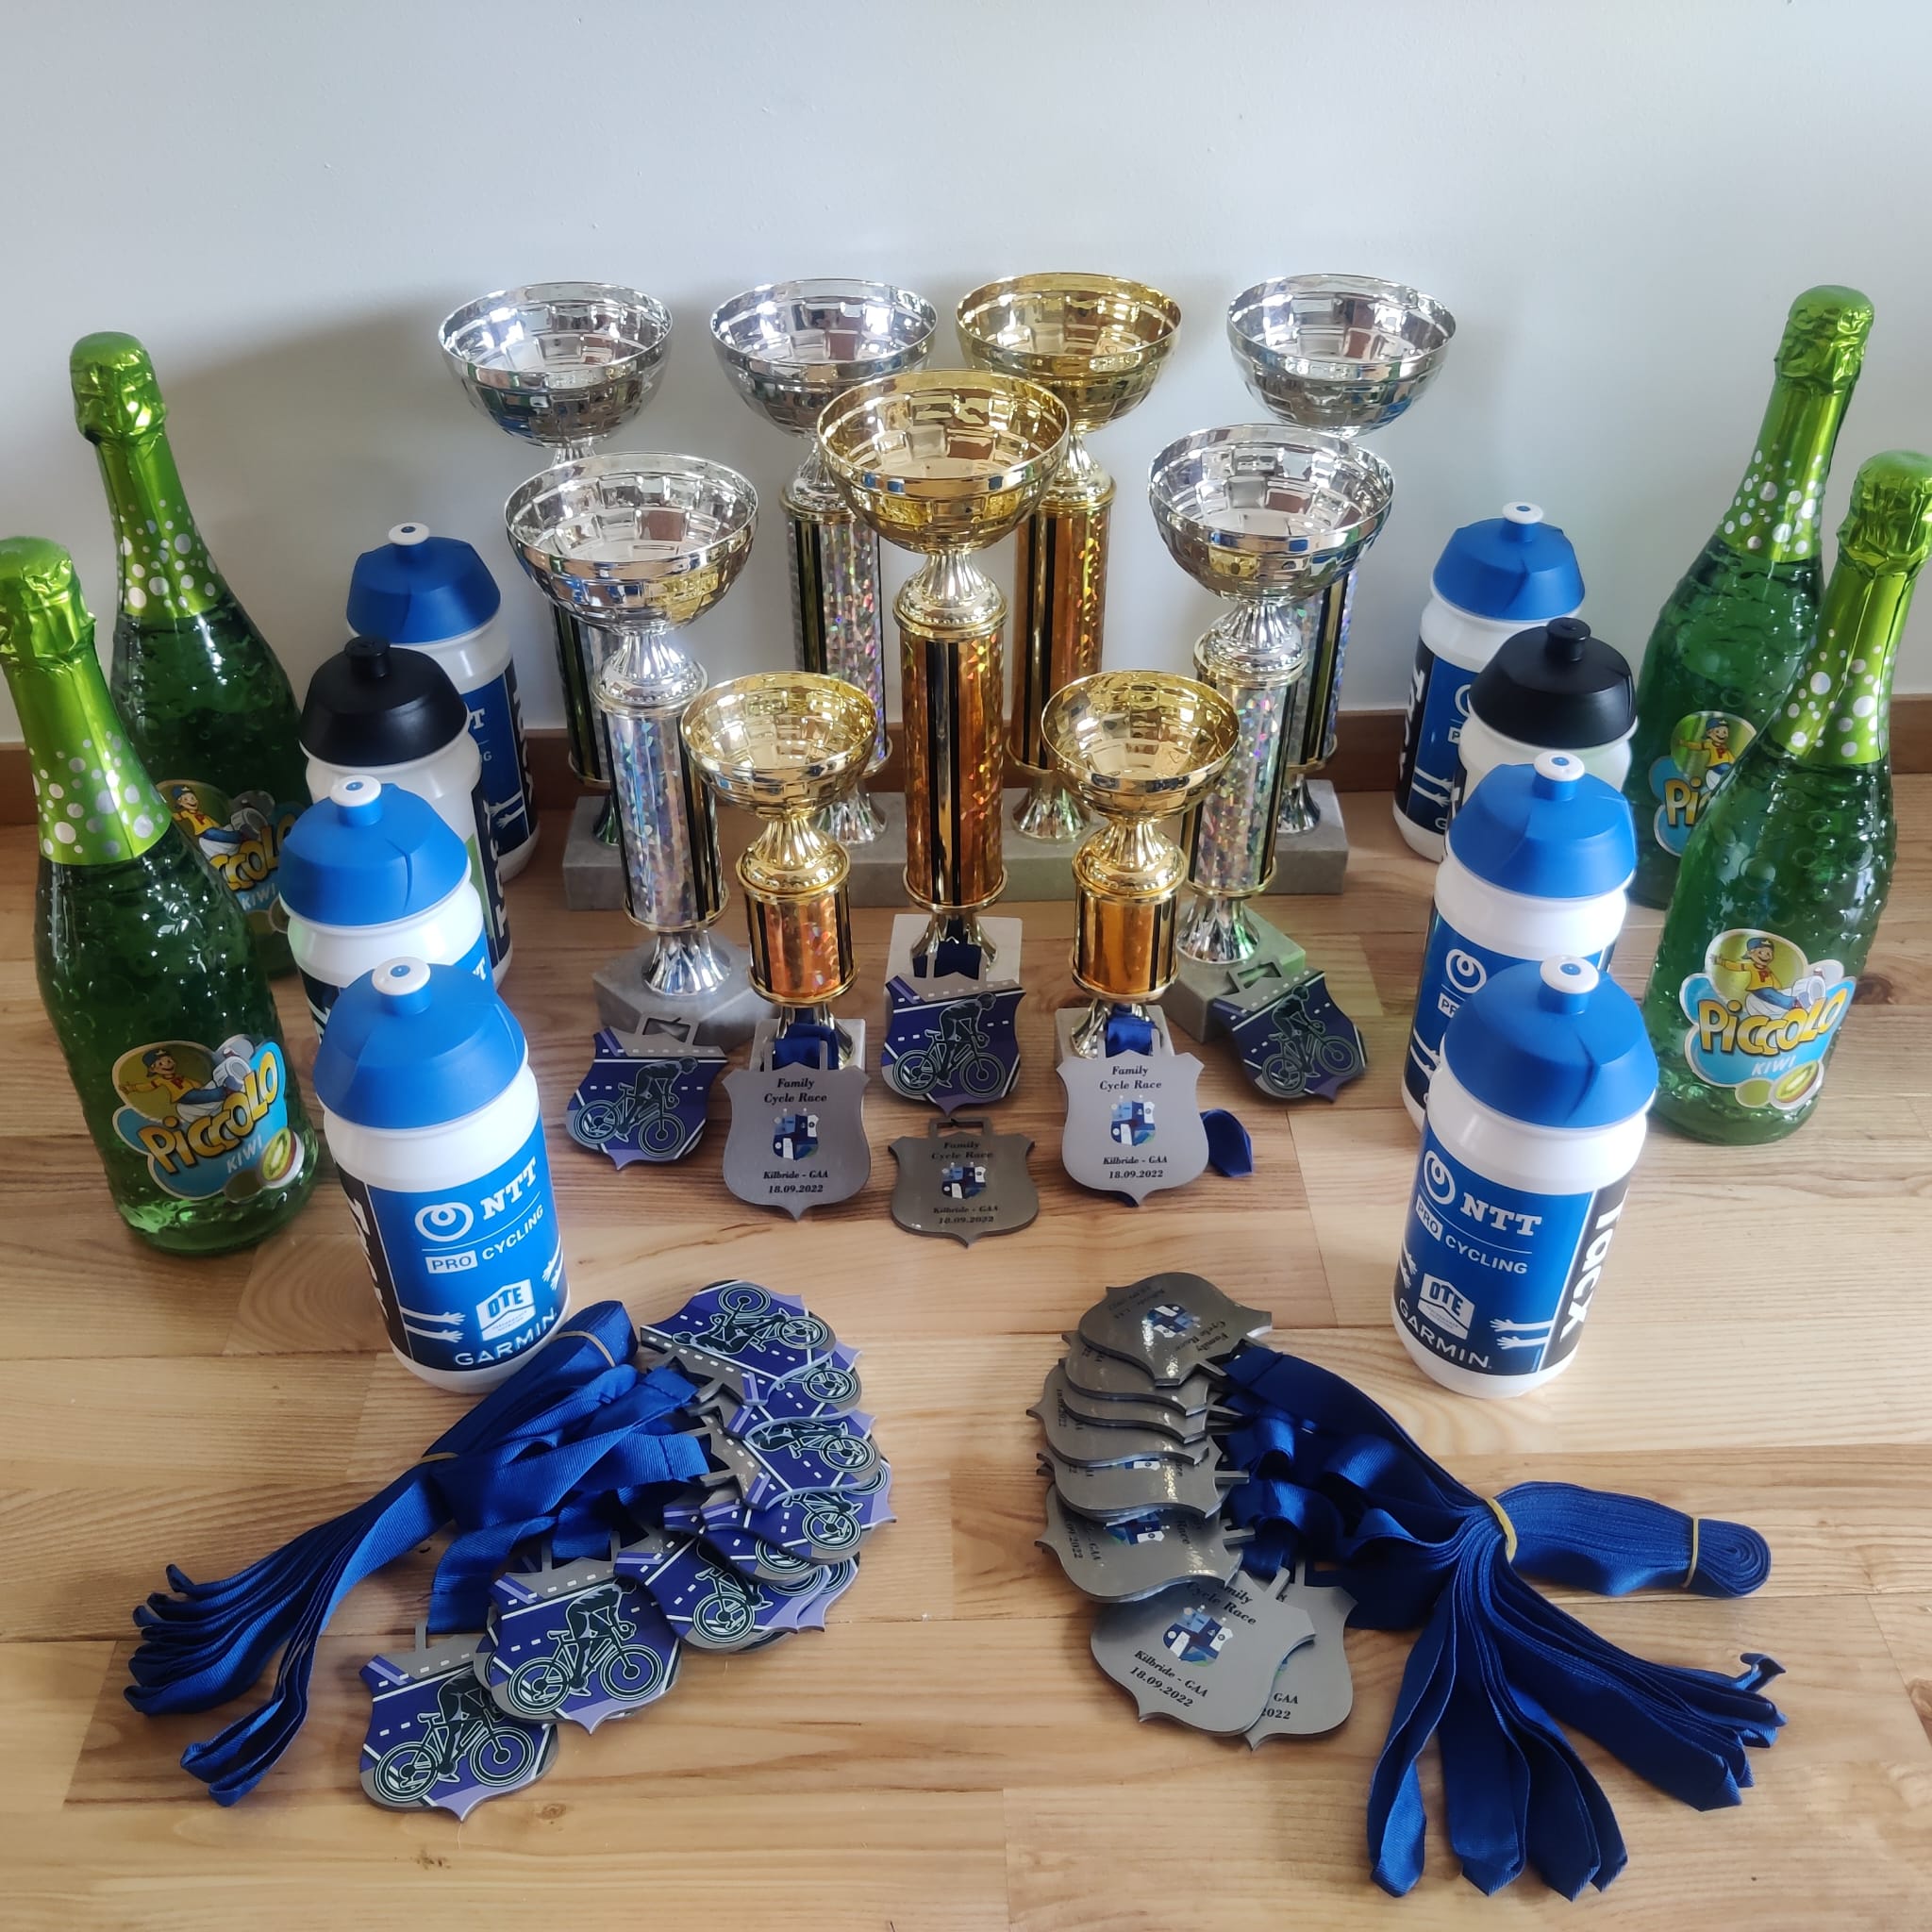 Family Cycle this Sunday...Medals and Trophies have arrived - Register Today...